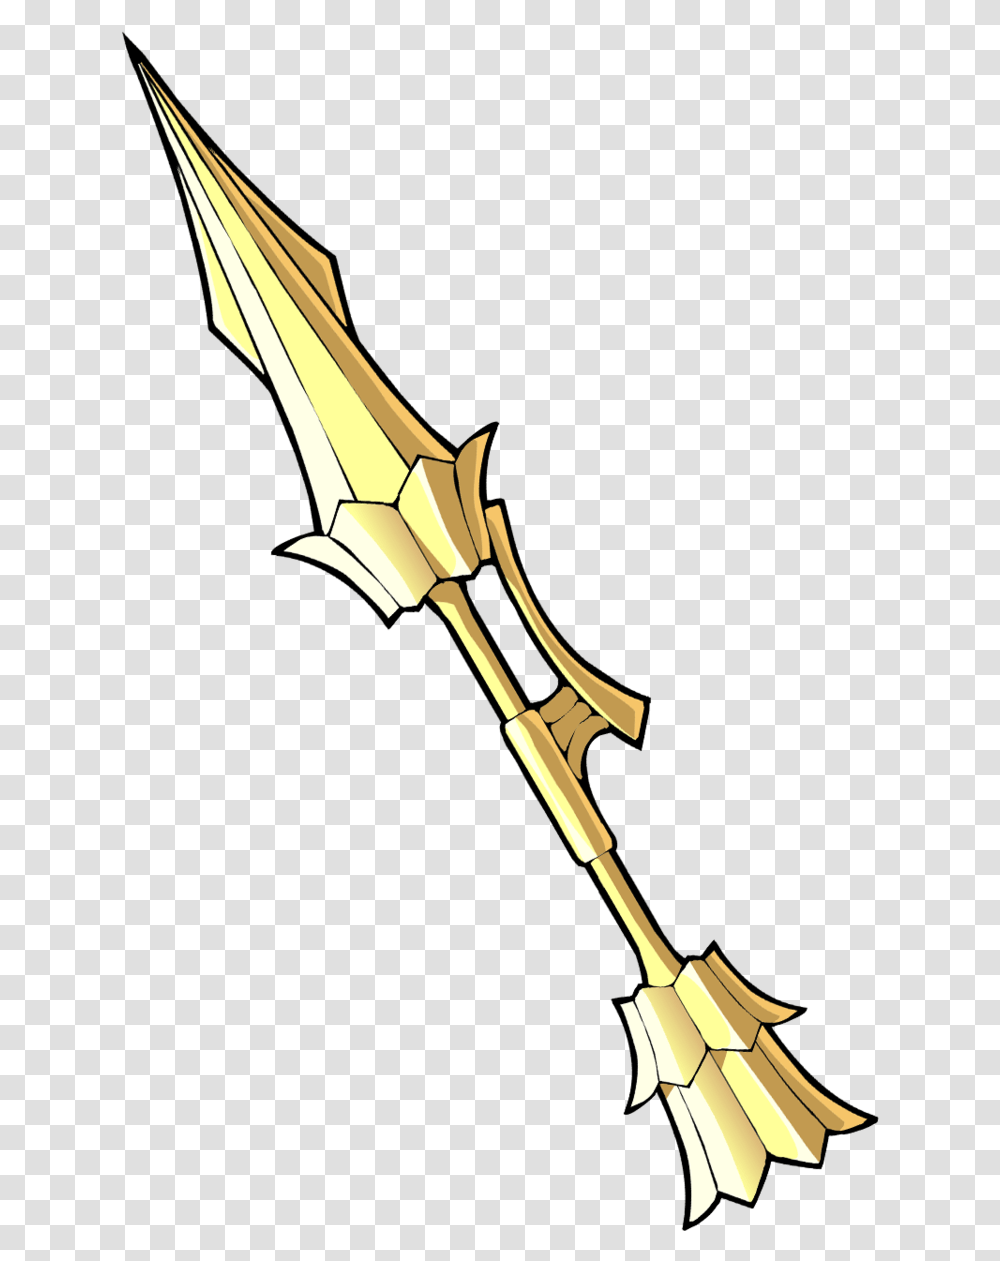 Brawlhalla Skyforged Spear Clipart Download Spear Brawlhalla, Weapon, Weaponry, Sword, Blade Transparent Png